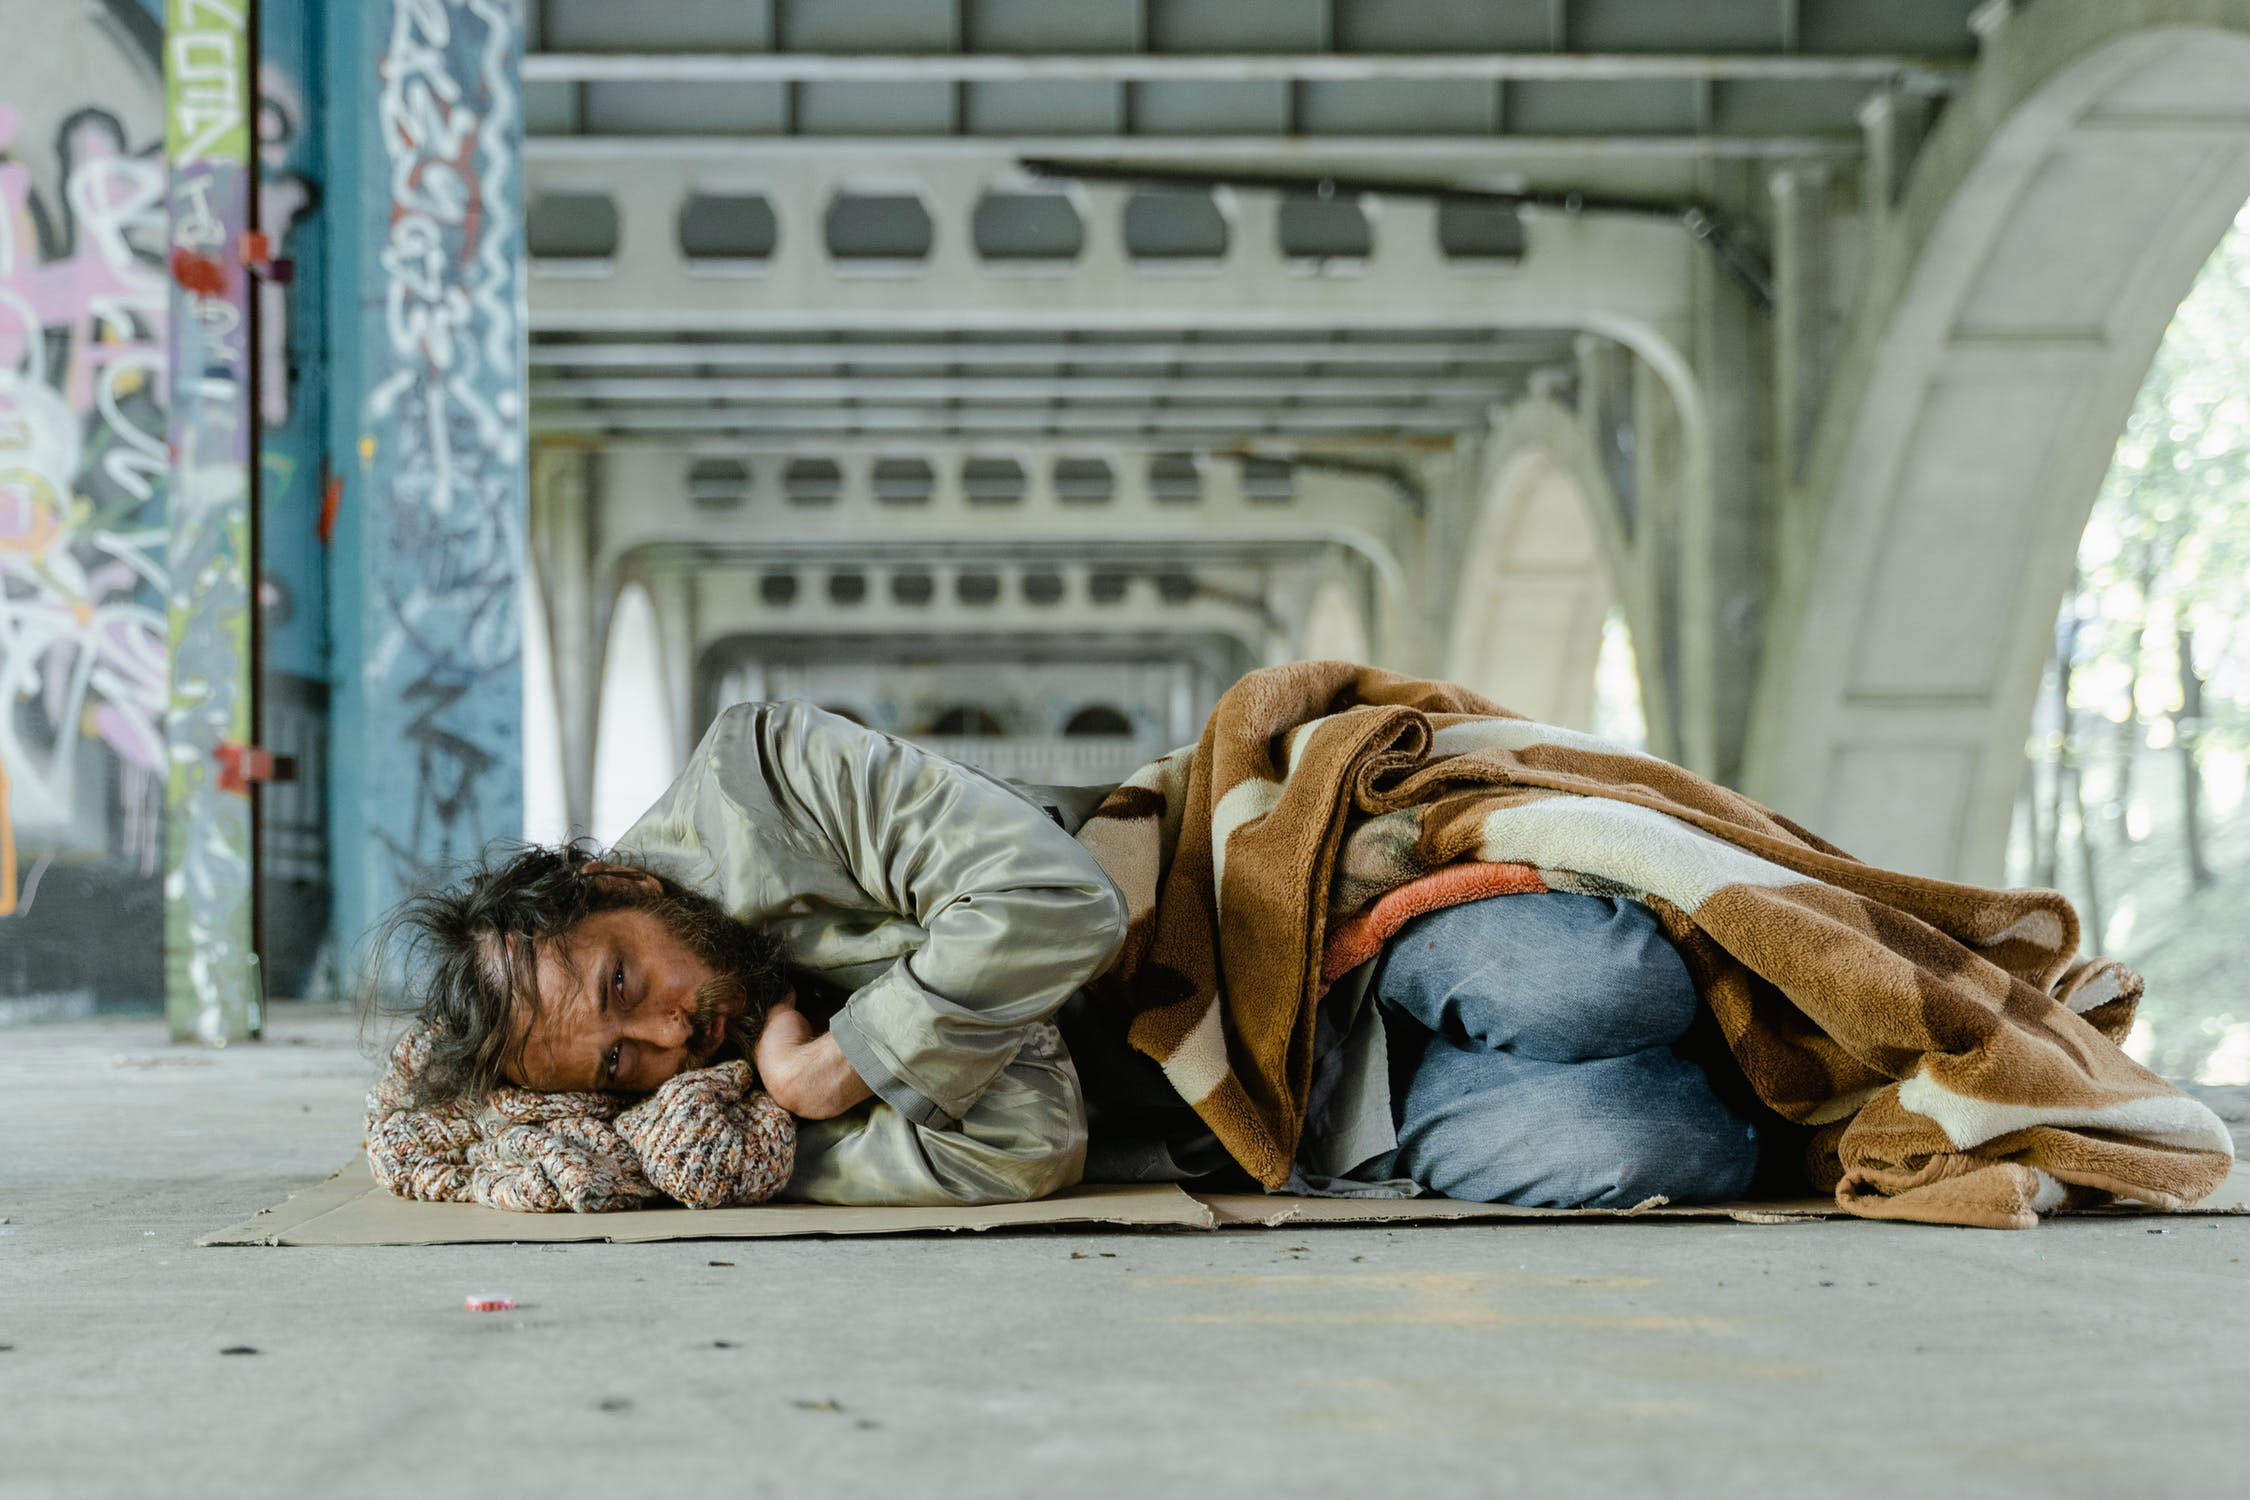 There was a homeless man sleeping under the bridge | Source: Pexels